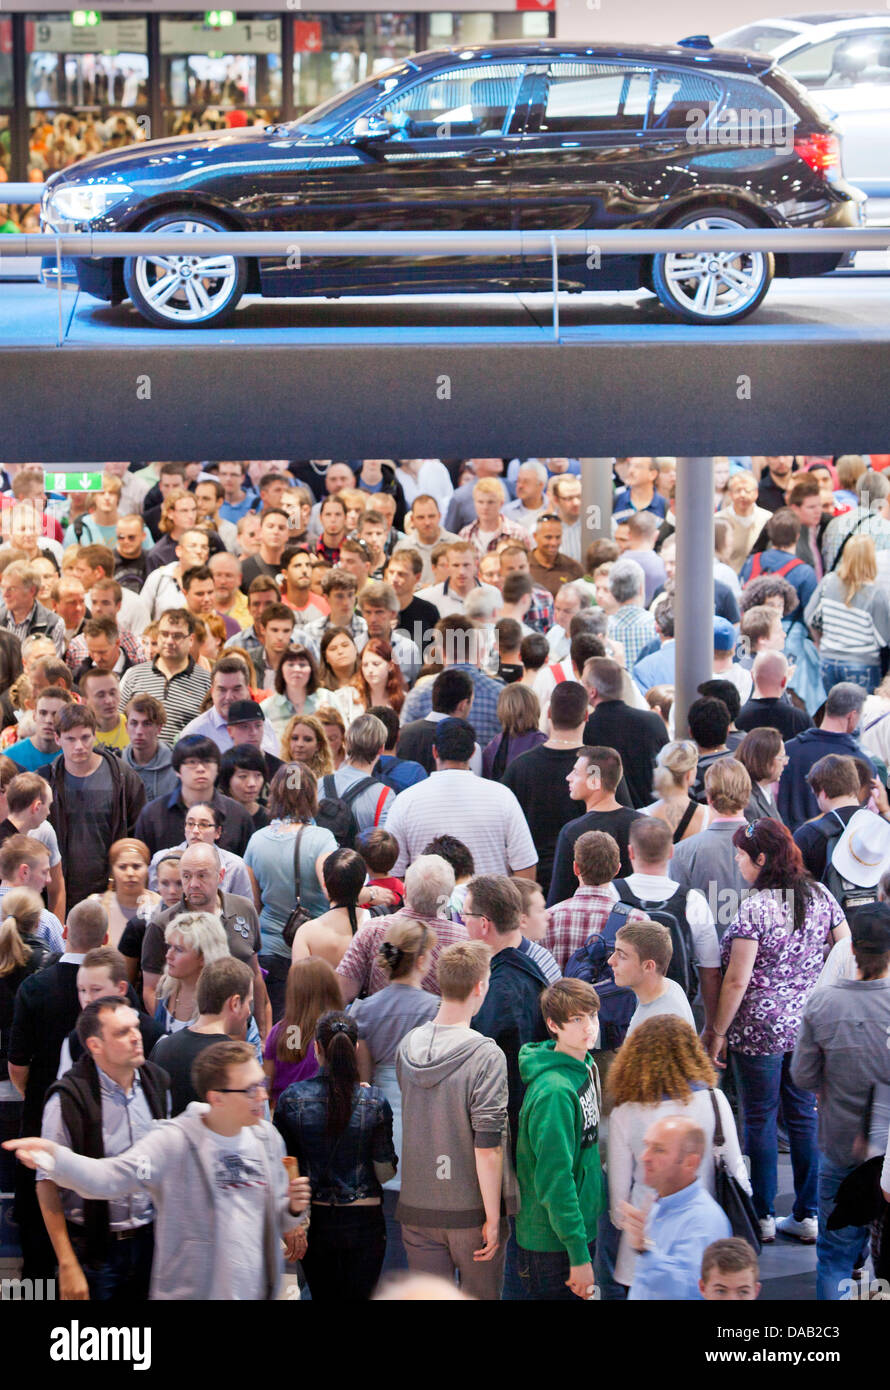 The BMW hall is crowded with visitors at the Frankfurt Motor Show (IAA) in Frankfurt Main, Germany 24 September 2011. According to the Association of the German Automotive Industry (VDA), the IAA has had many more visitors than expected. Photo: FRANK RUMPENHORST Stock Photo